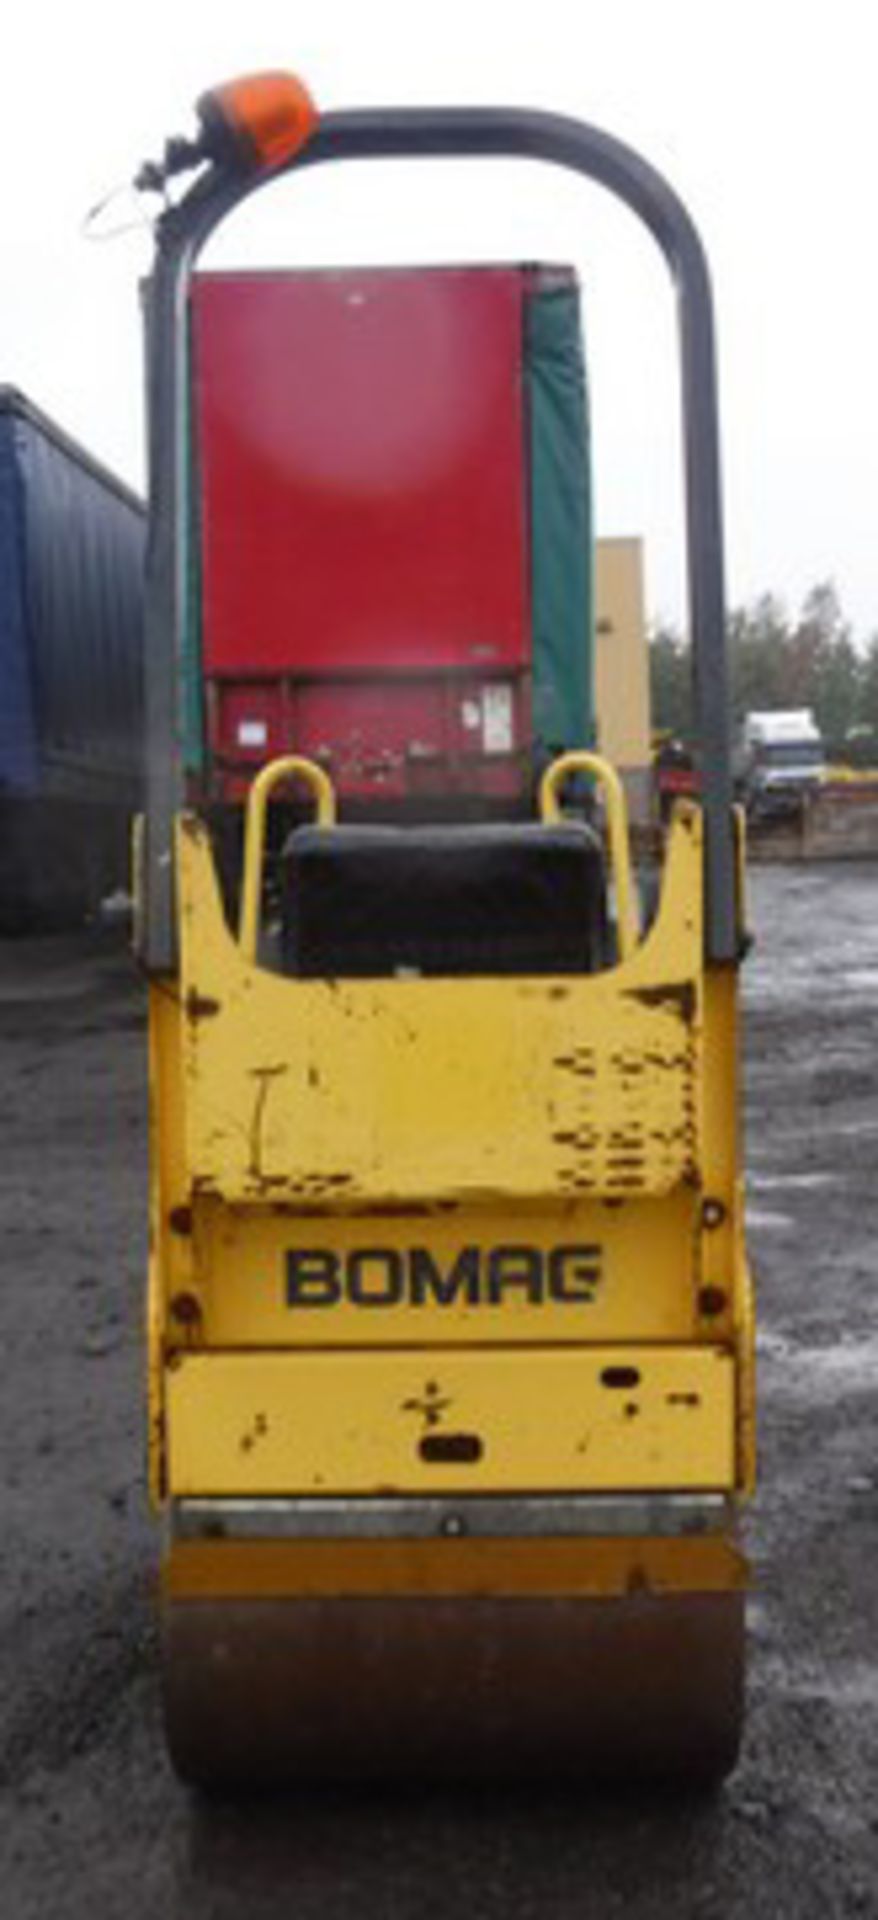 BOMAG BW80 ADH-2 roller. S/N 101460426169. 585hrs (not verified) - Image 9 of 12